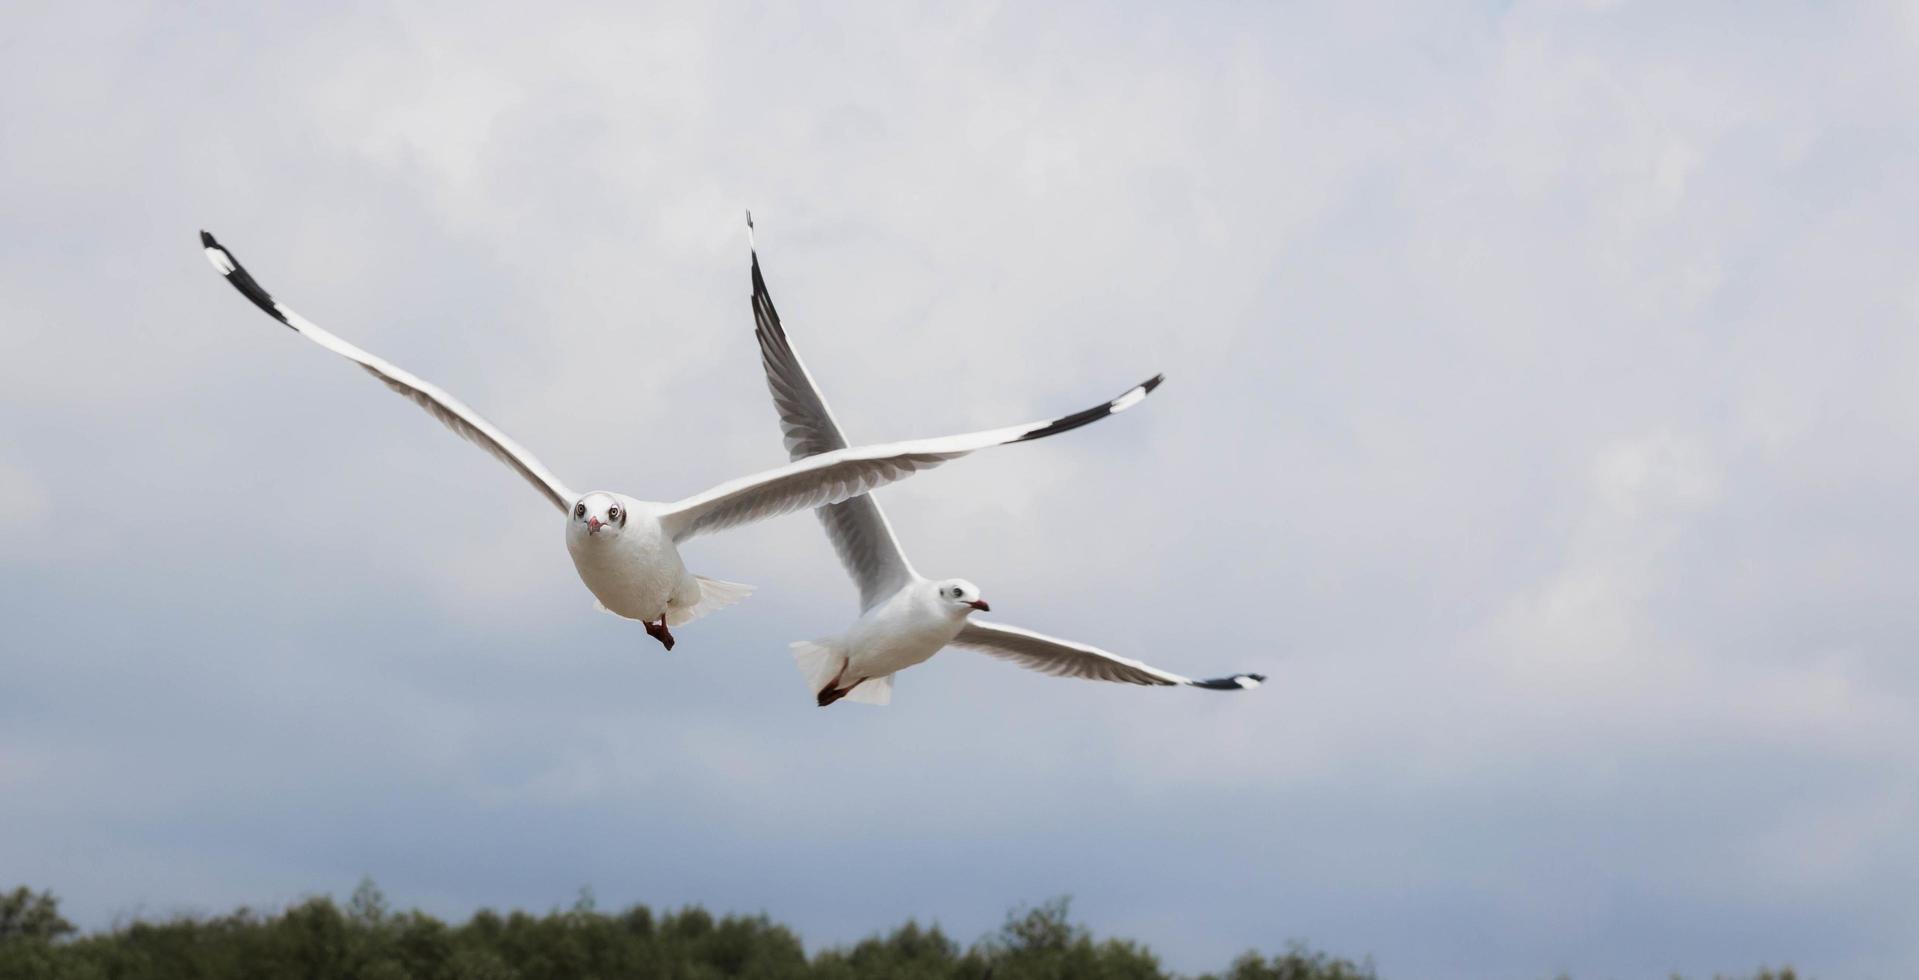 Two seagulls flying in the sky - images photo